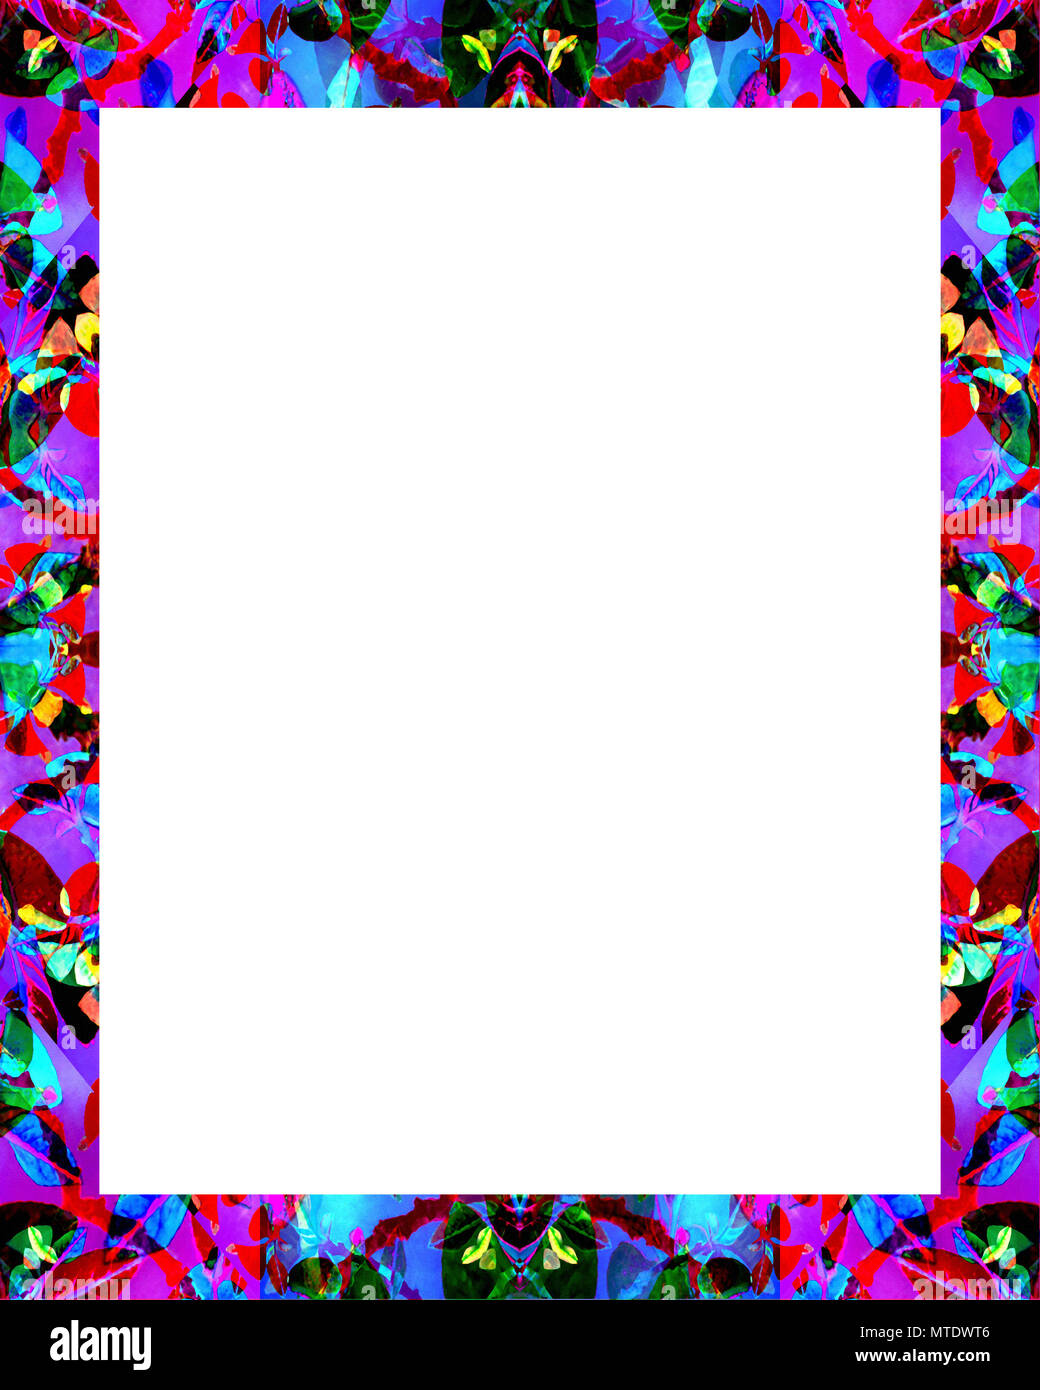 White frame background with decorated design borders Stock Photo - Alamy